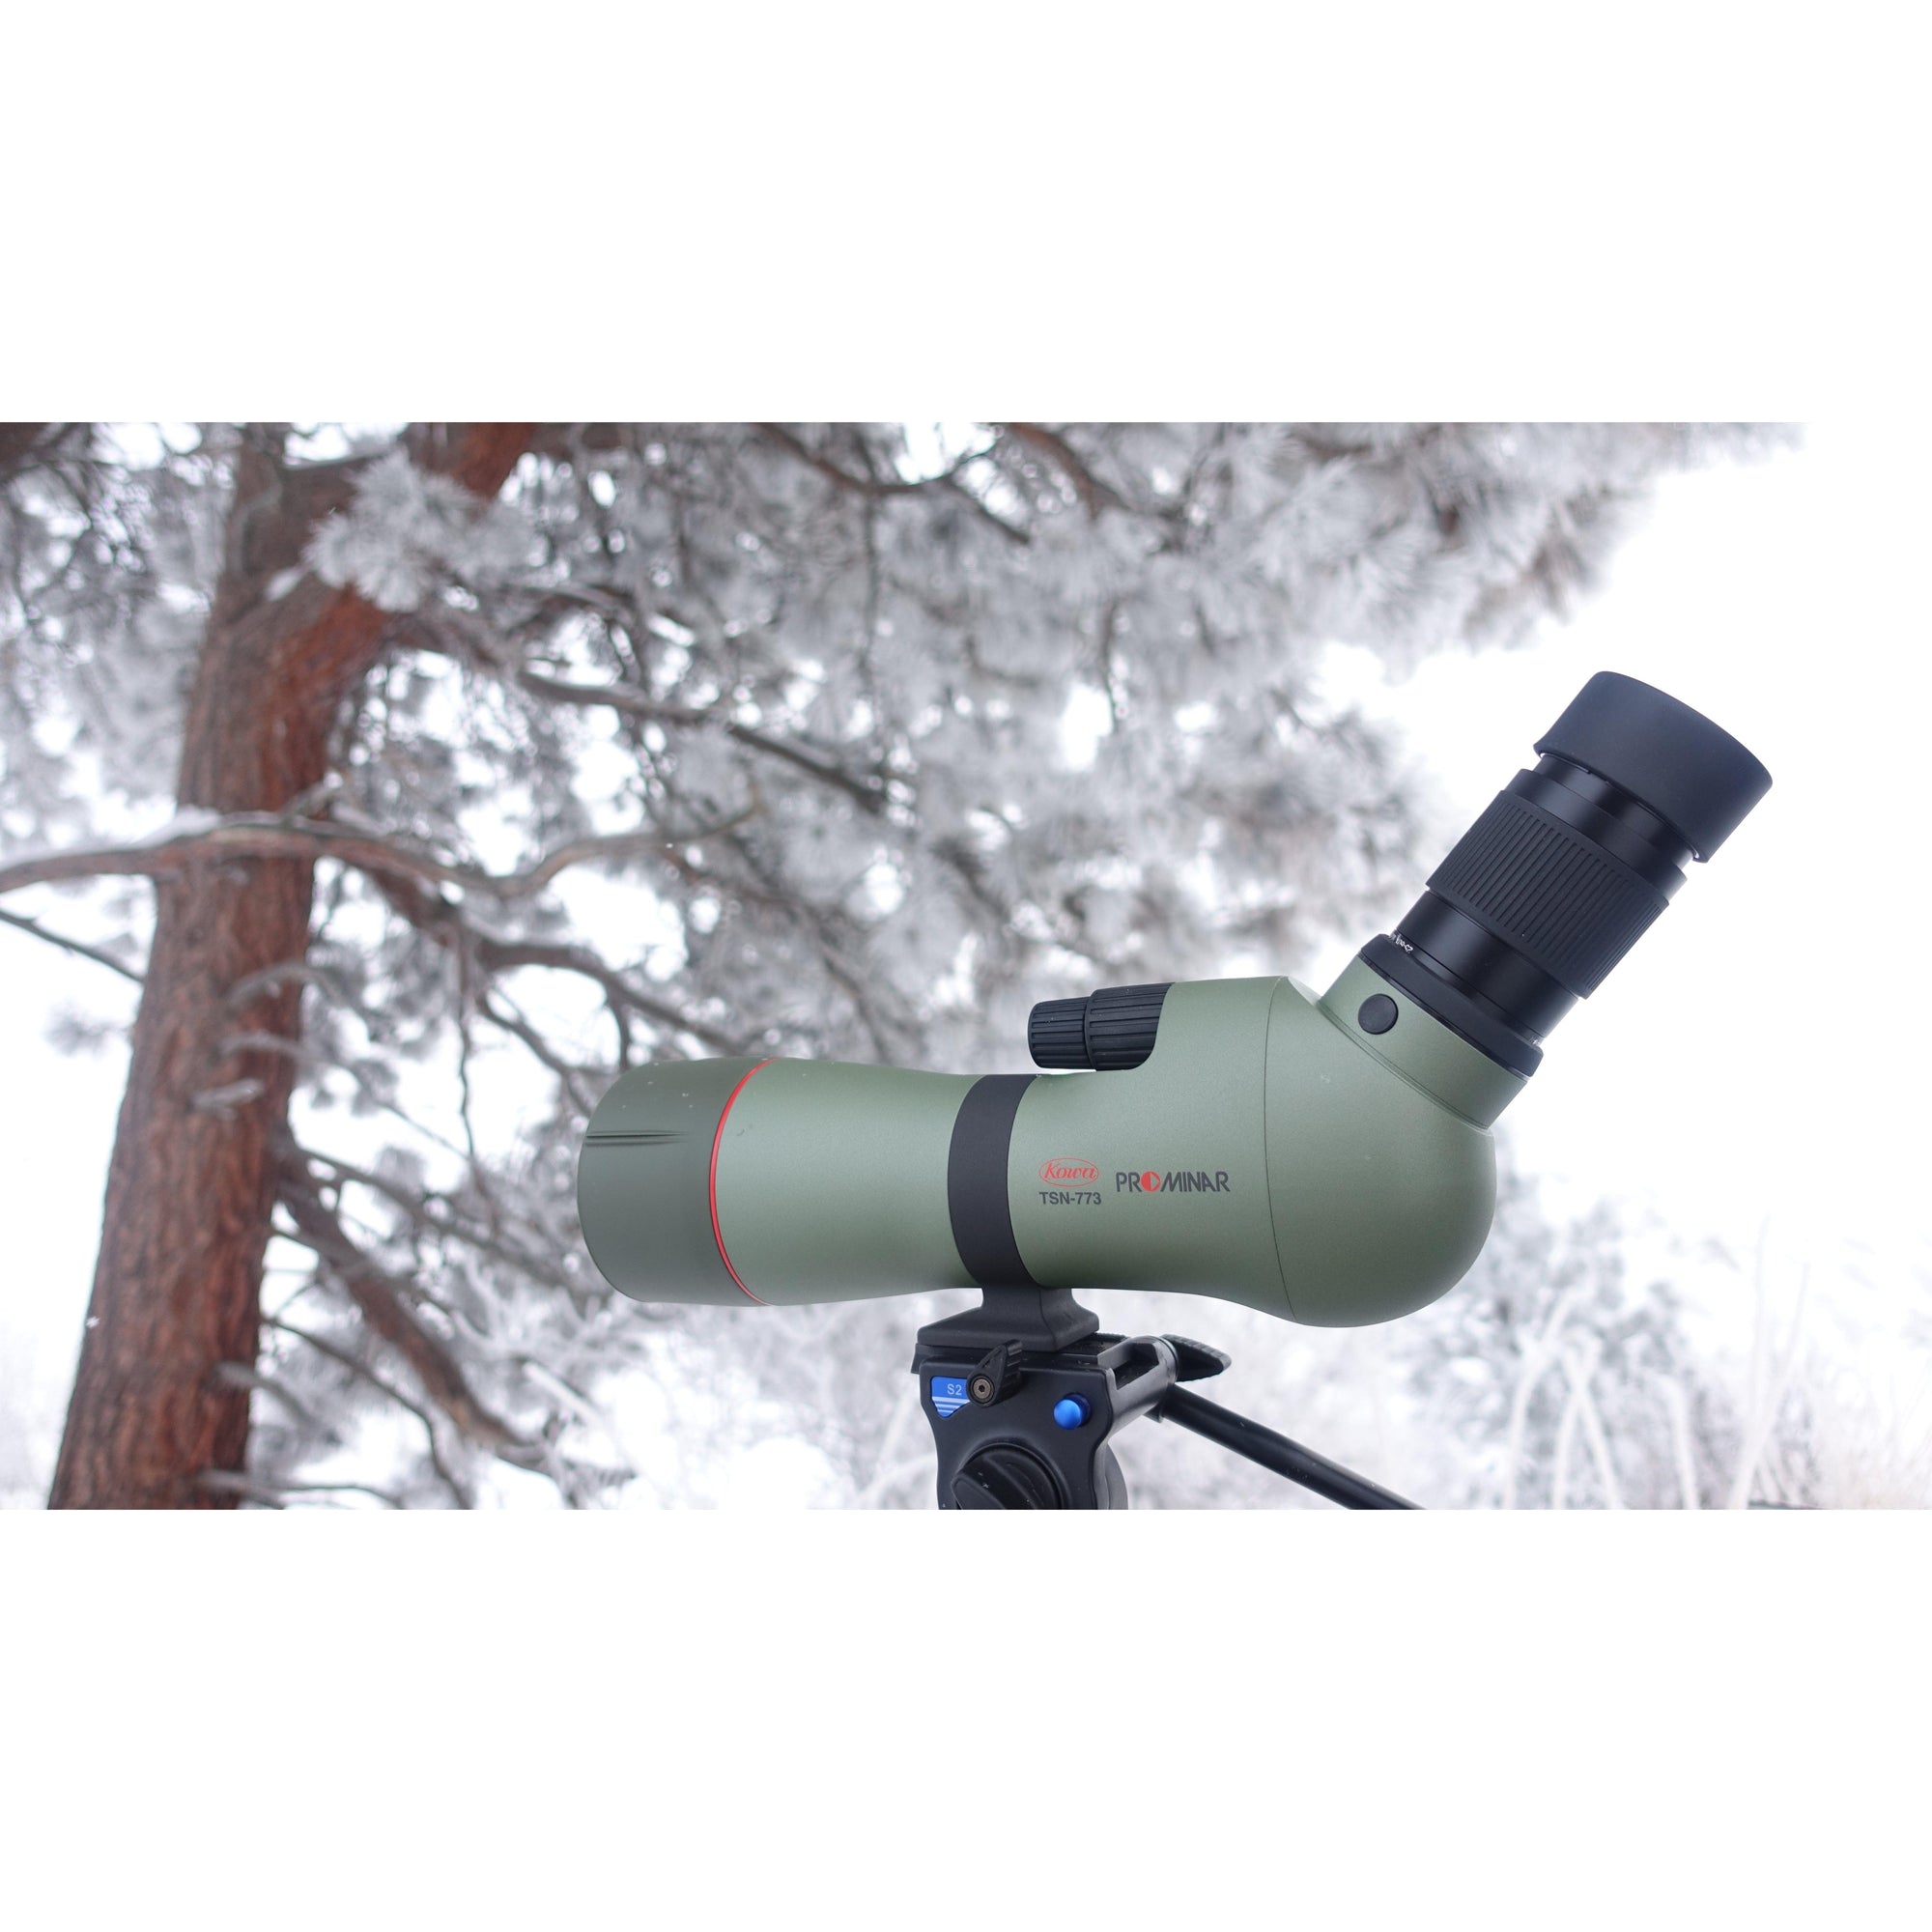 Kowa 77mm Spotting Scope Comparison and Review